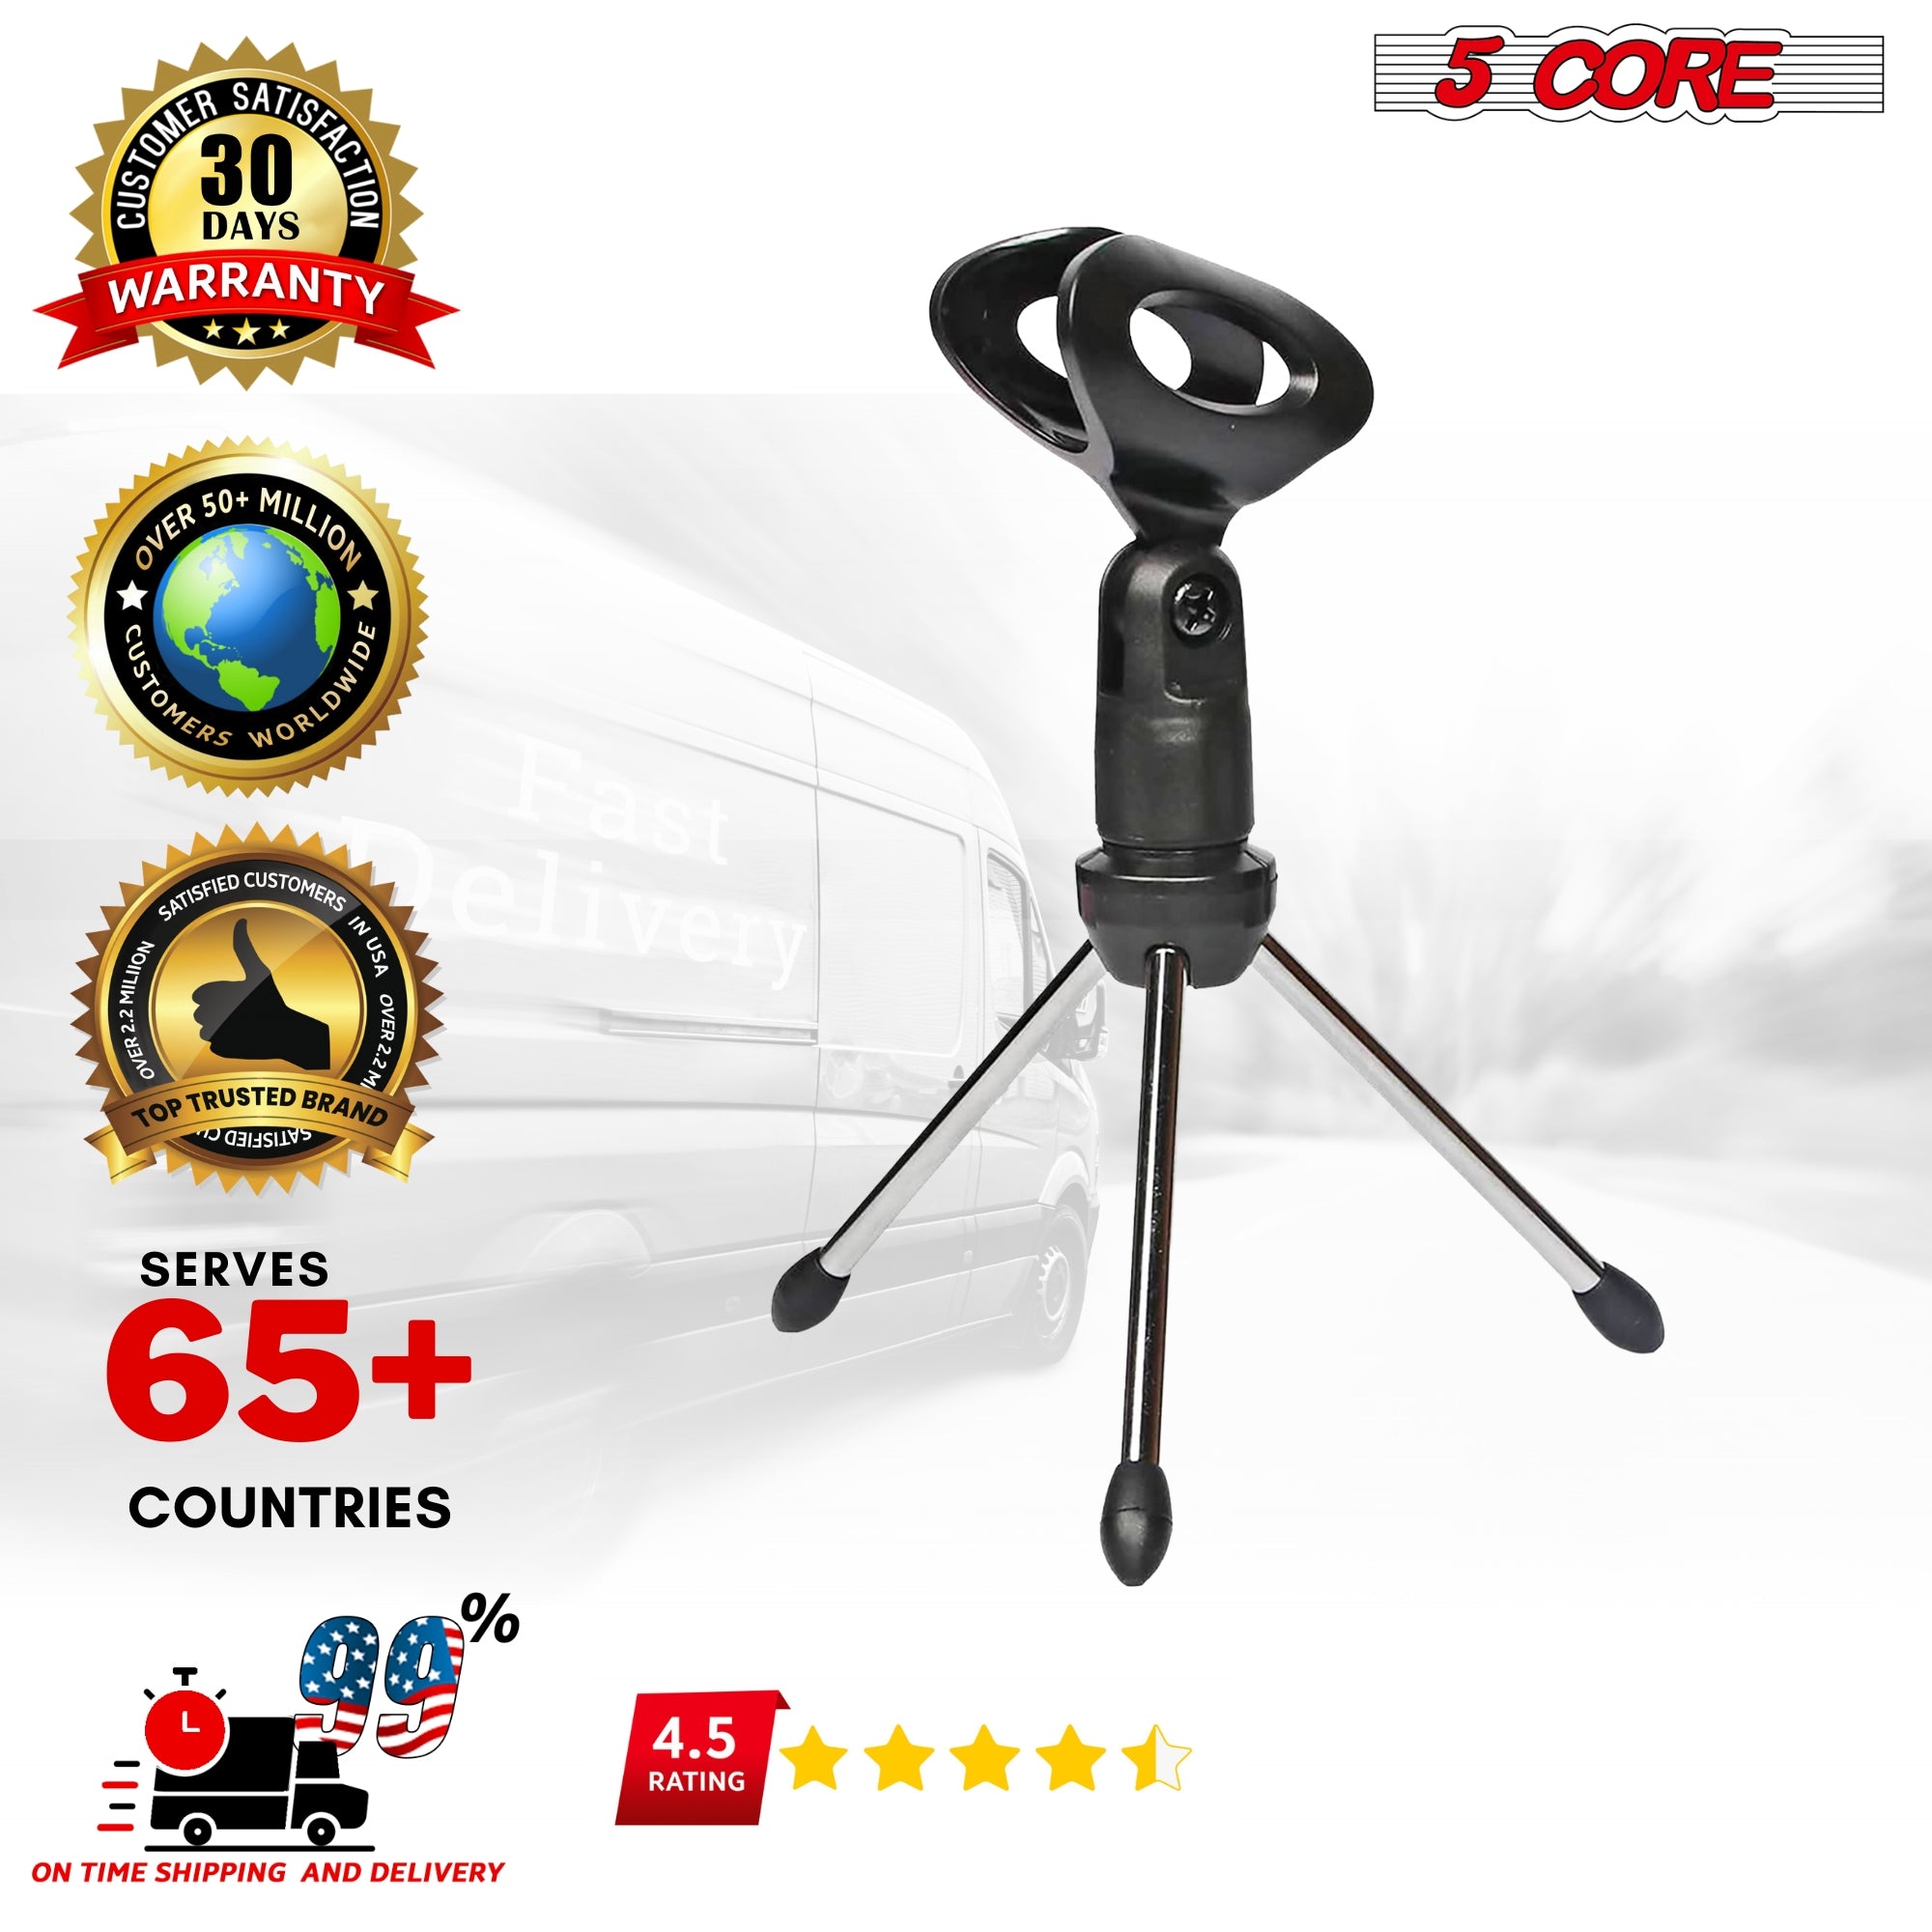 Adjustable tabletop microphone holder: Enhances audio quality during recordings.